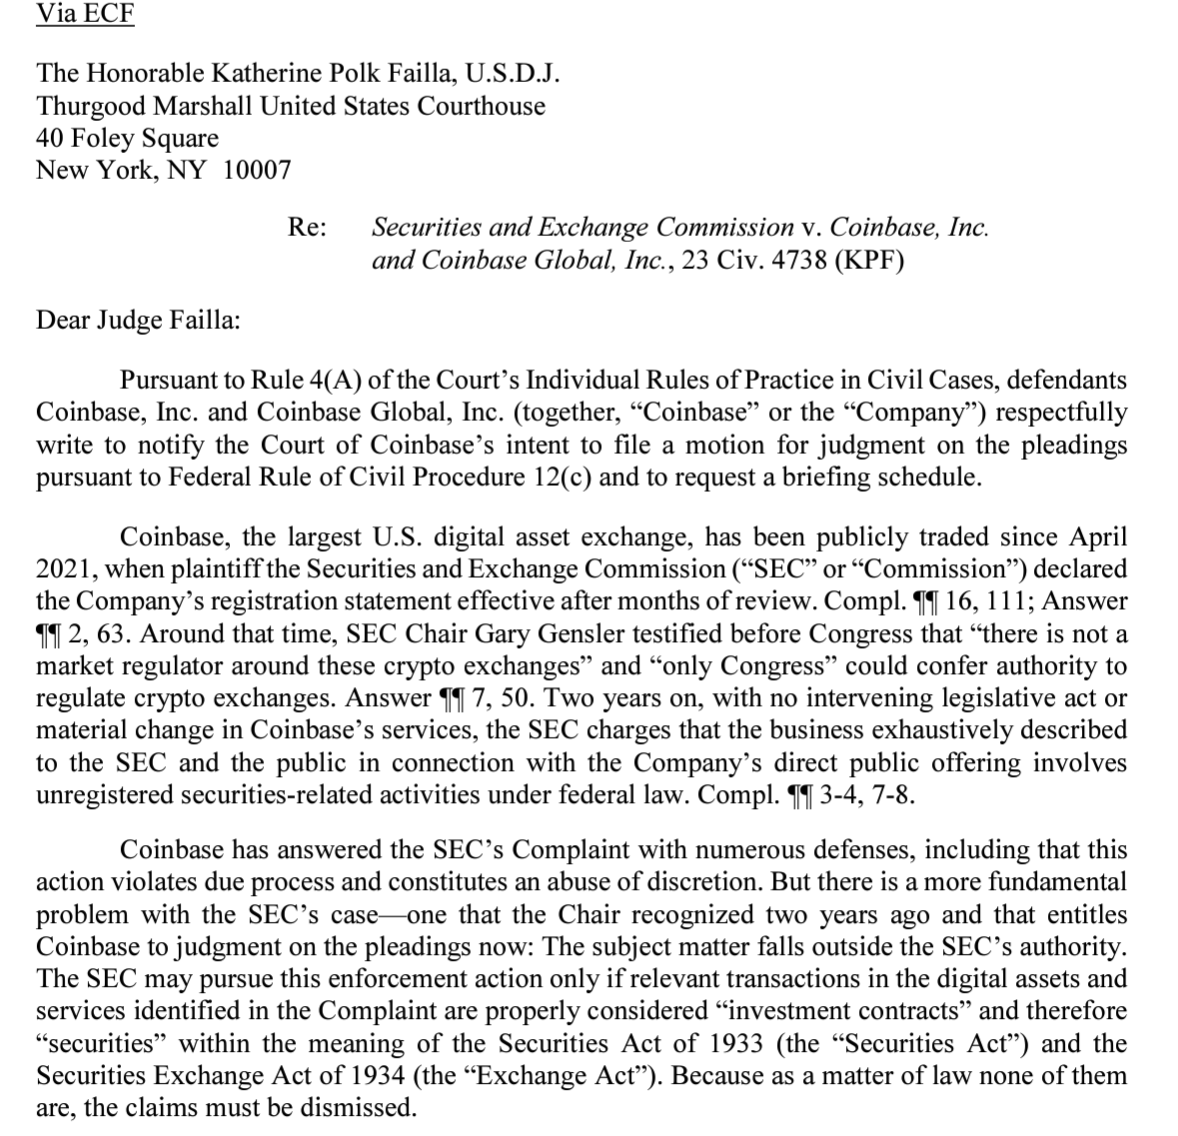 Yes, #Coinbase answered the #SEC's complaint, but they also seek leave to file a motion asking the court for a judgment in its favor based solely on the SEC's complaint - before any actual facts are developed. In other words, they ask the court to say 'you win on the merits,